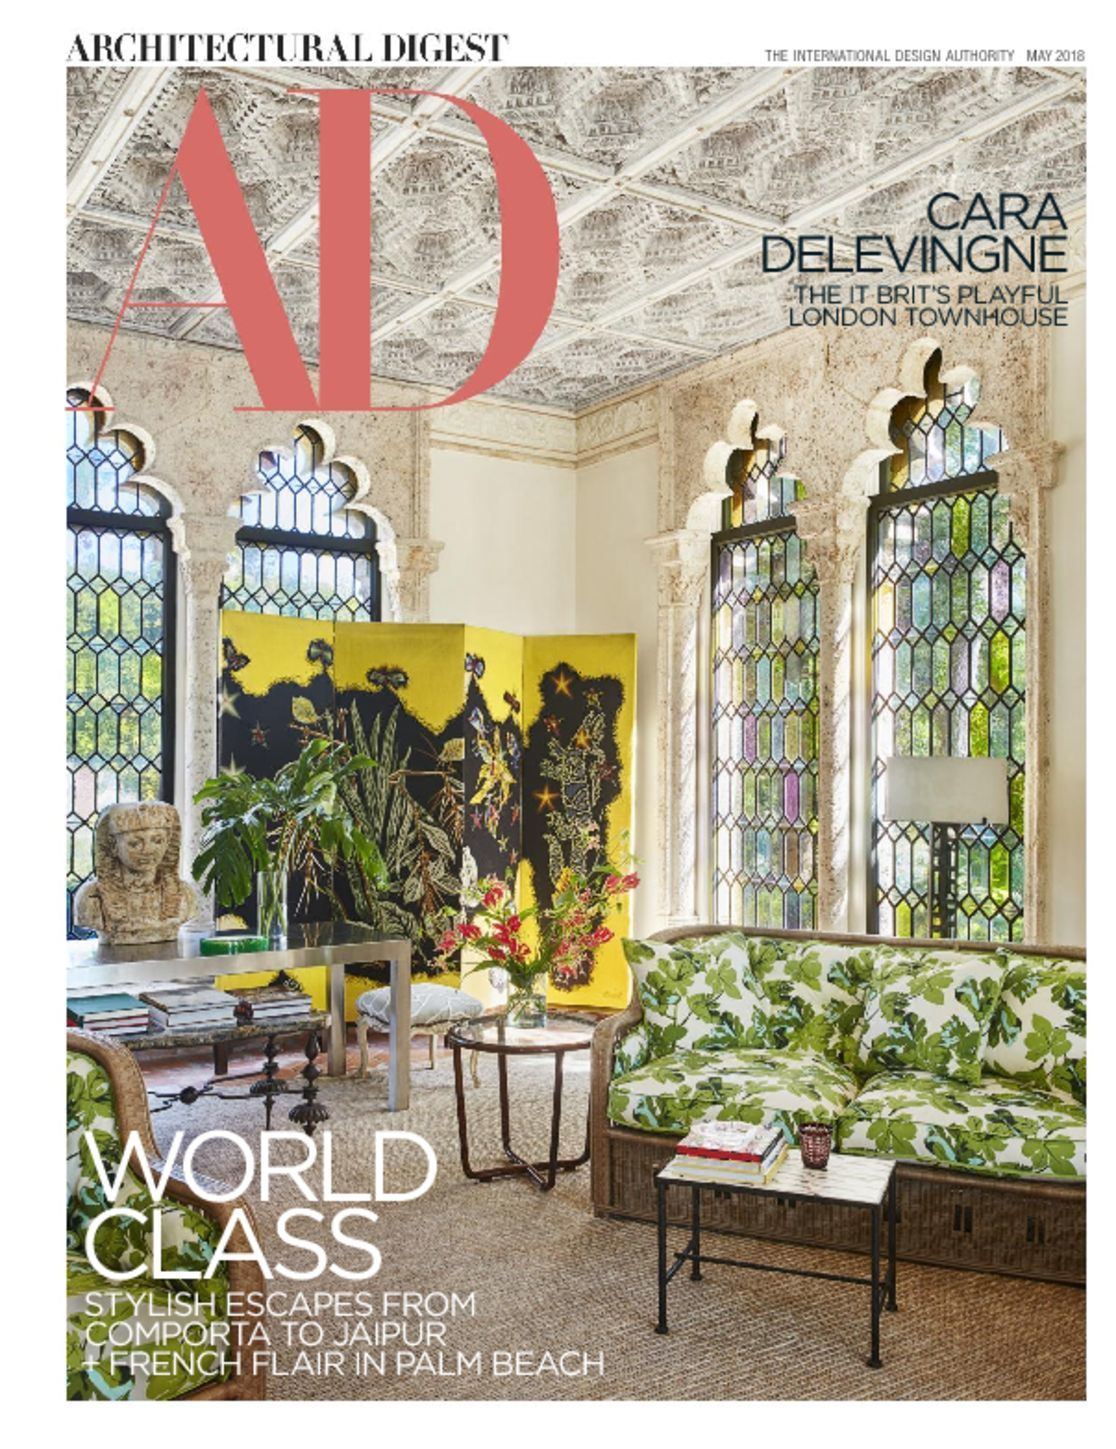 architectural-digest-magazine-the-international-design-authority-discountmags